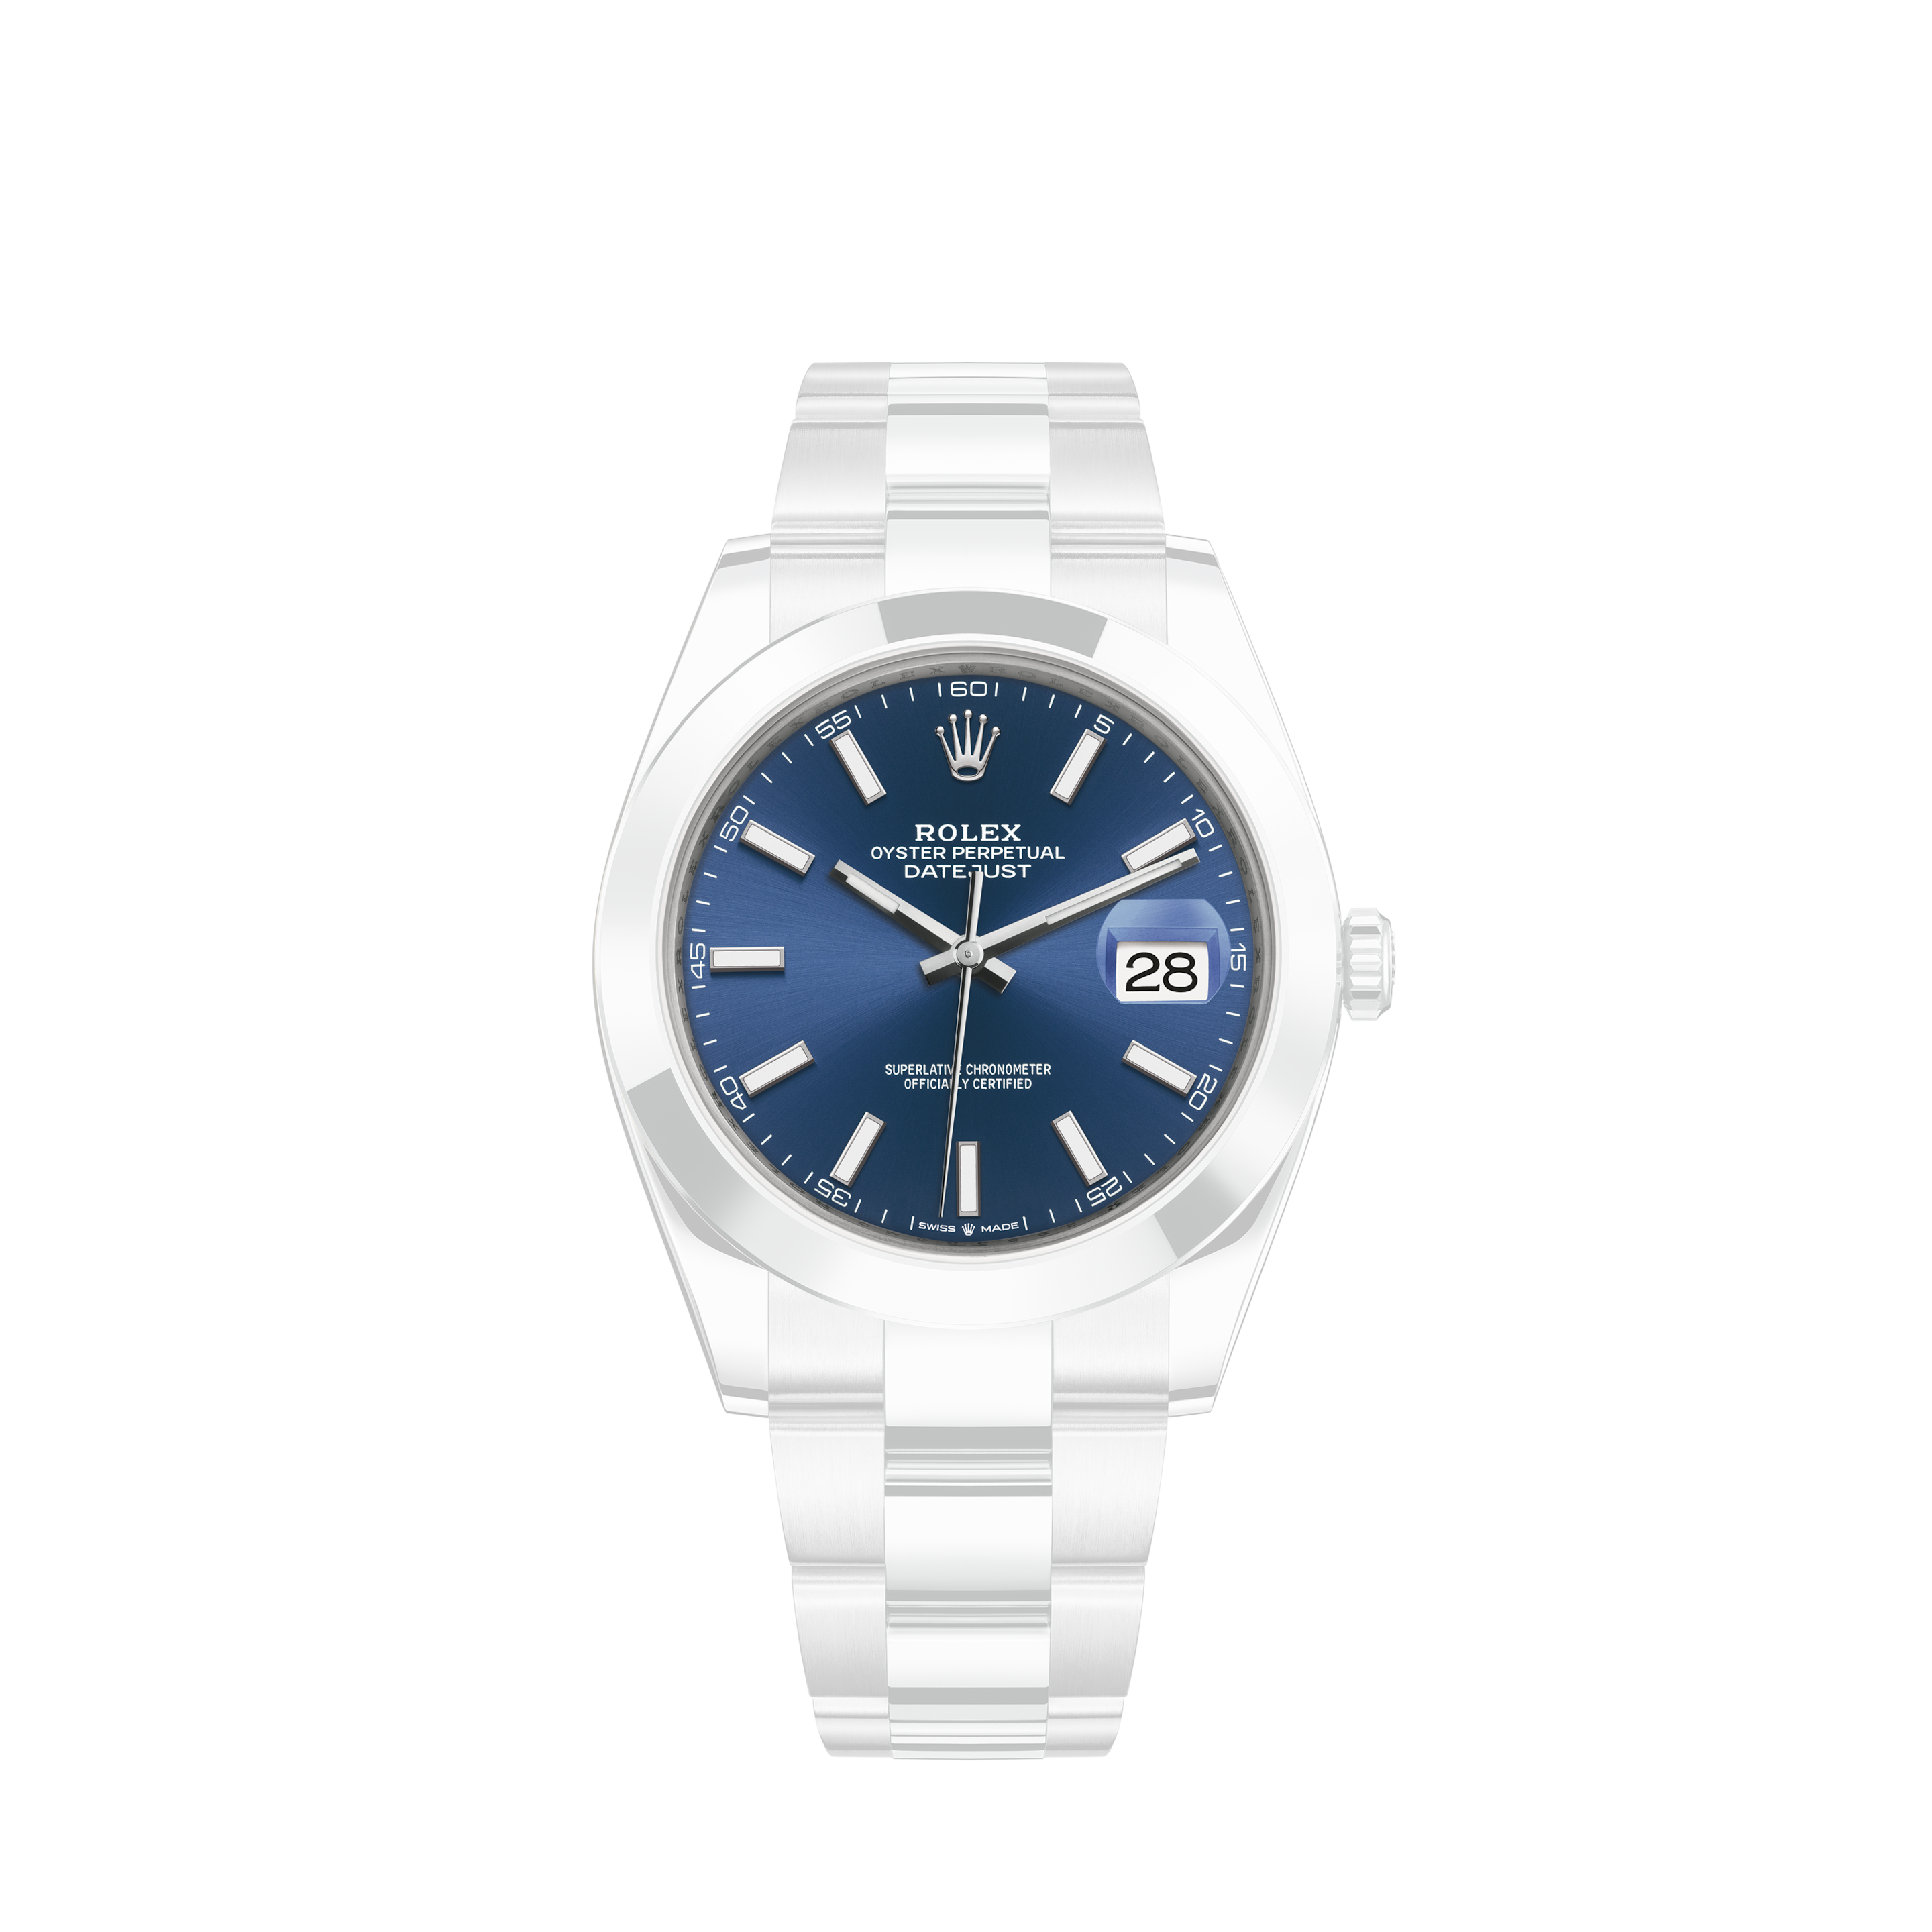 Rolex Oyster Perpetual Datejust 116234 Blue Dial Men's Watch